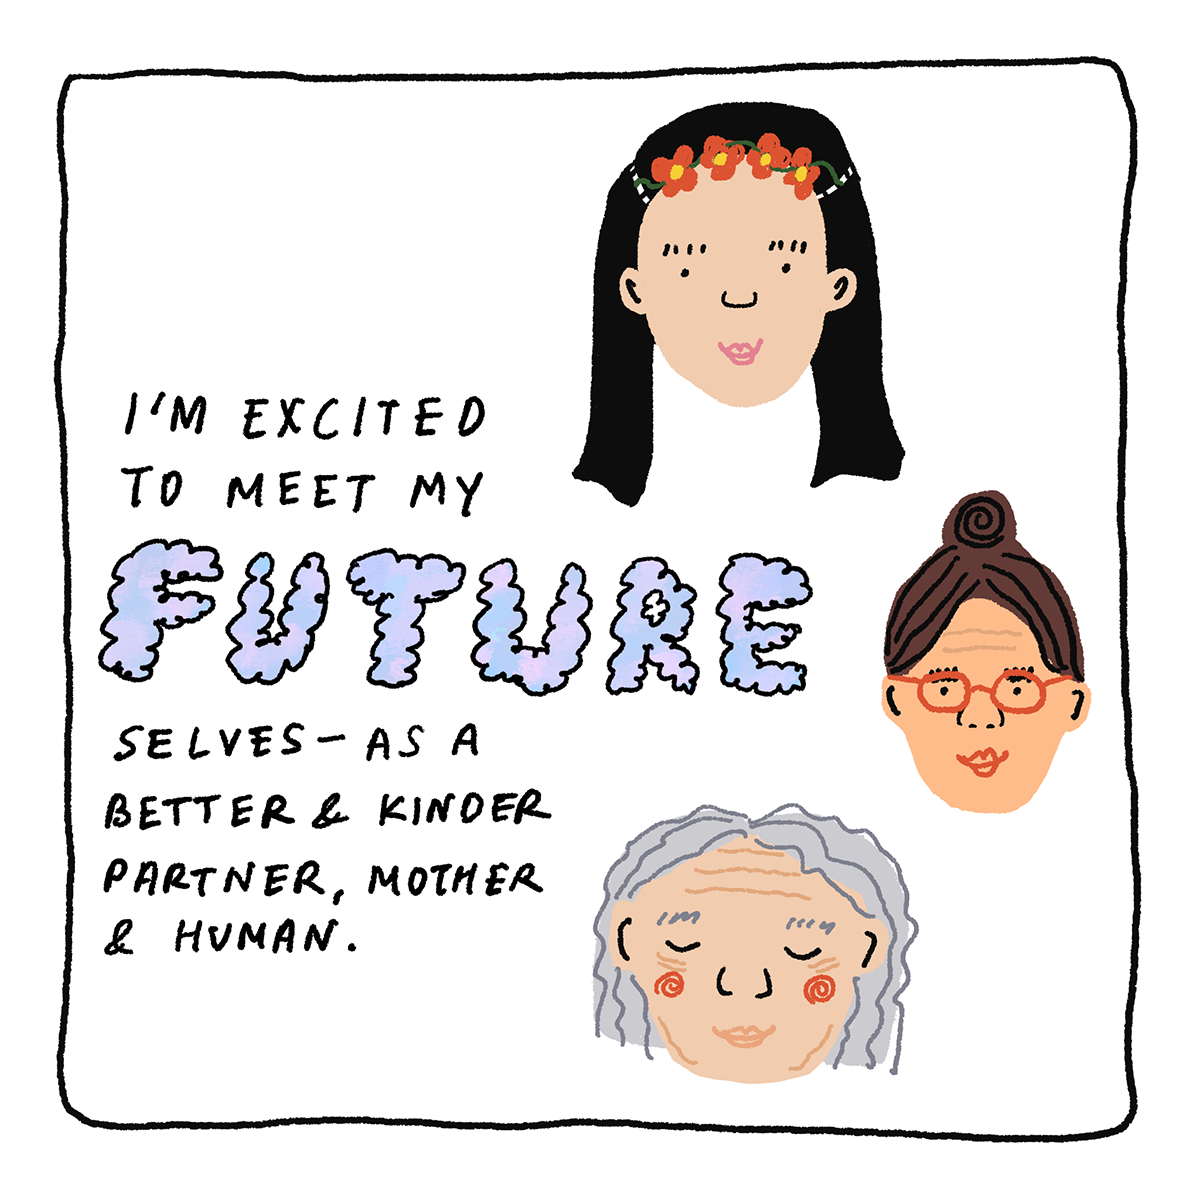 I'm excited to meet my future selves—as a better and kinder partner, mother, and human.